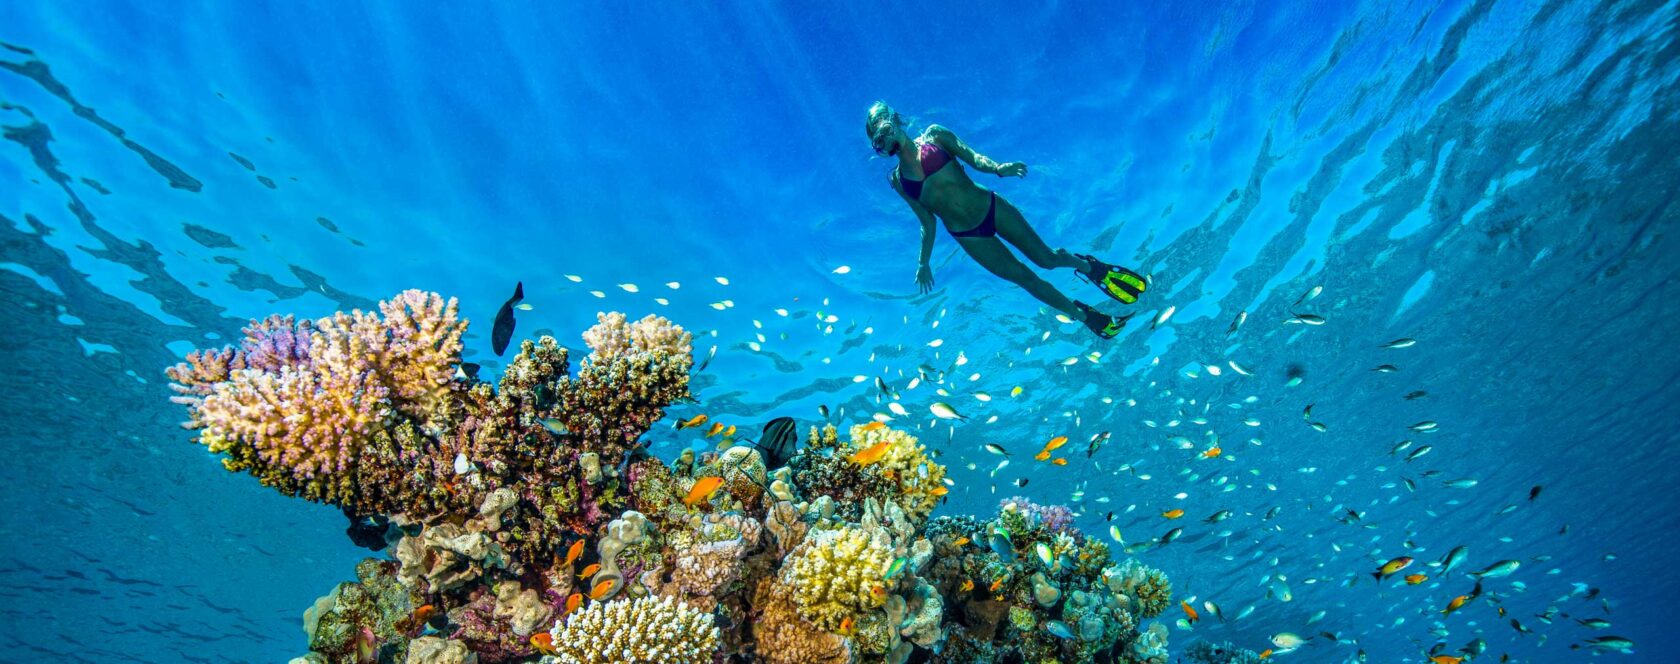 A diver snorkeling by a coral reef.